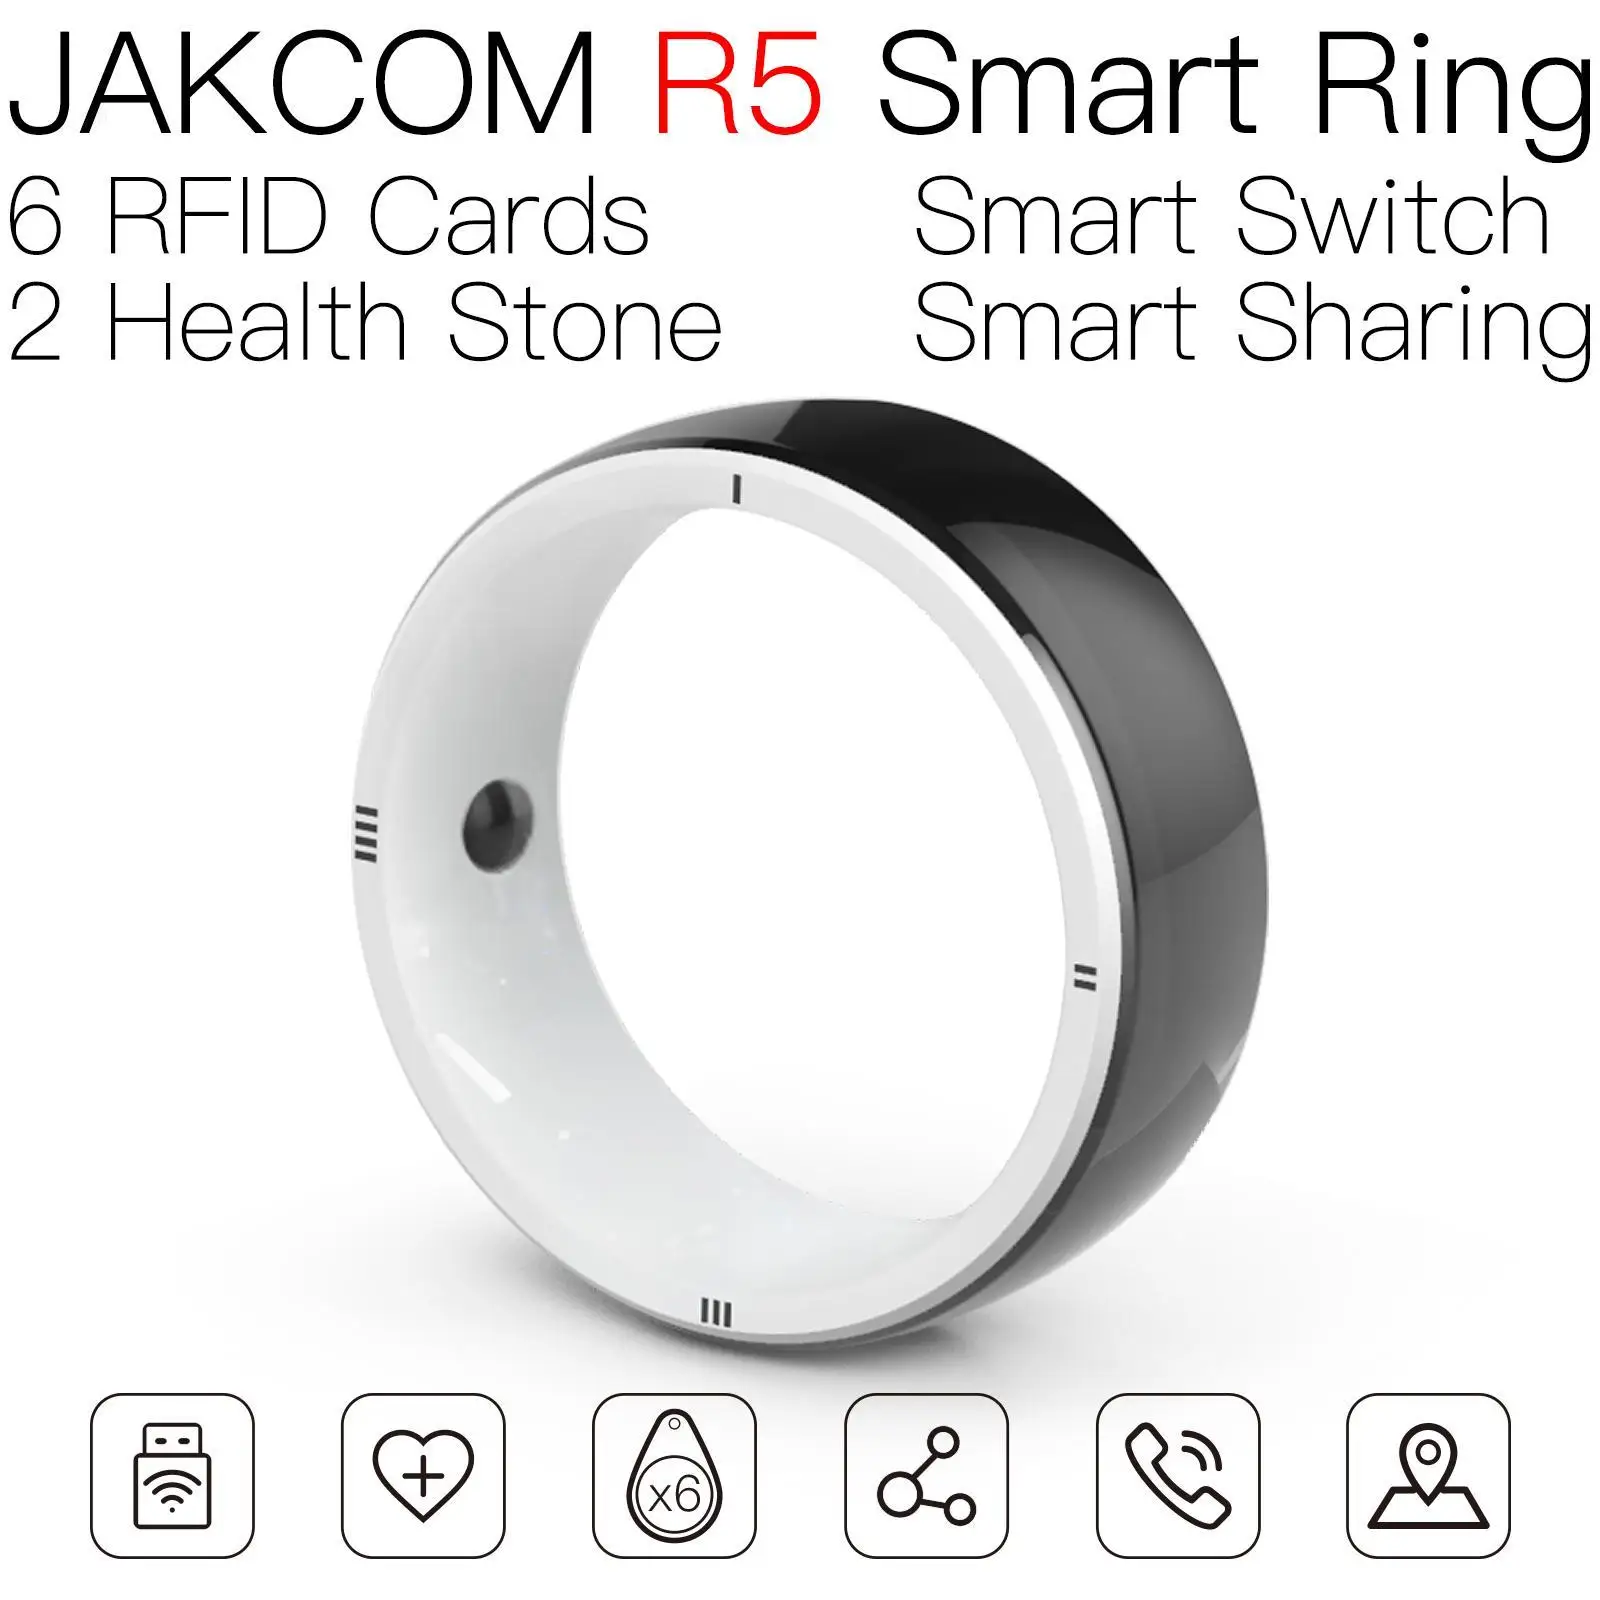 

JAKCOM R5 Smart Ring Super value than silent pet tag tarjetero crossing gt08 plus nfc chip palomas benzing g2 icon utrack 6 in